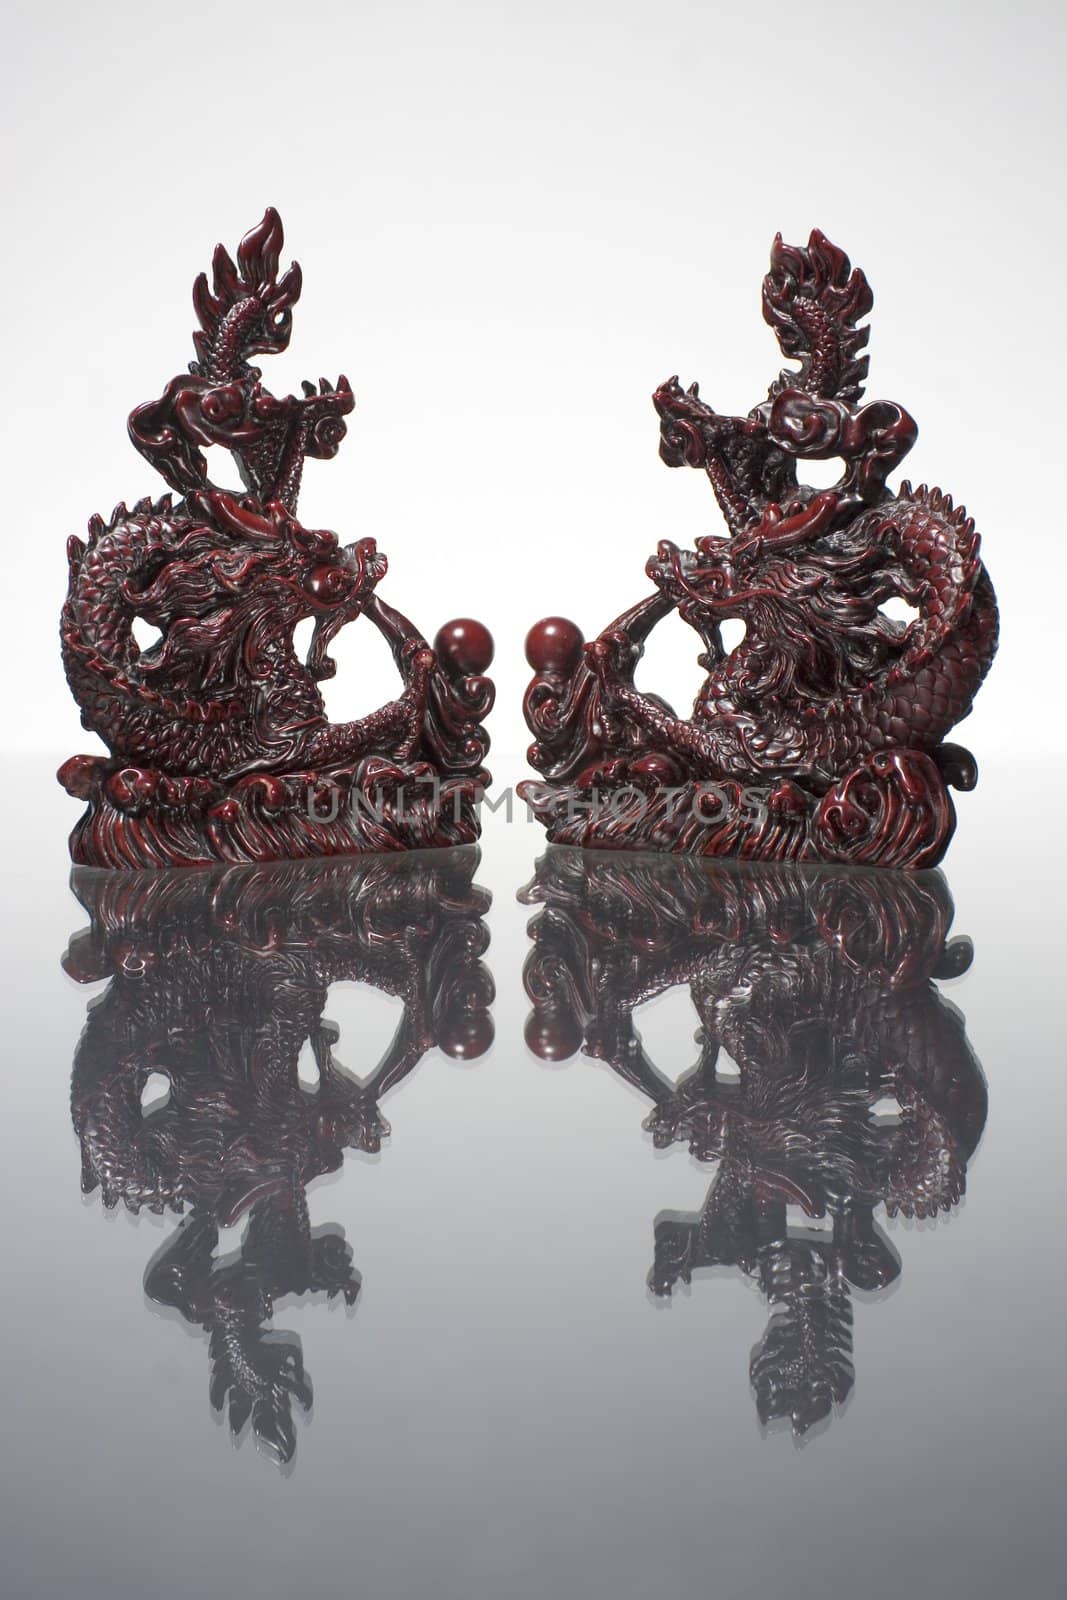 two dragon statue reflecting on a grey surface